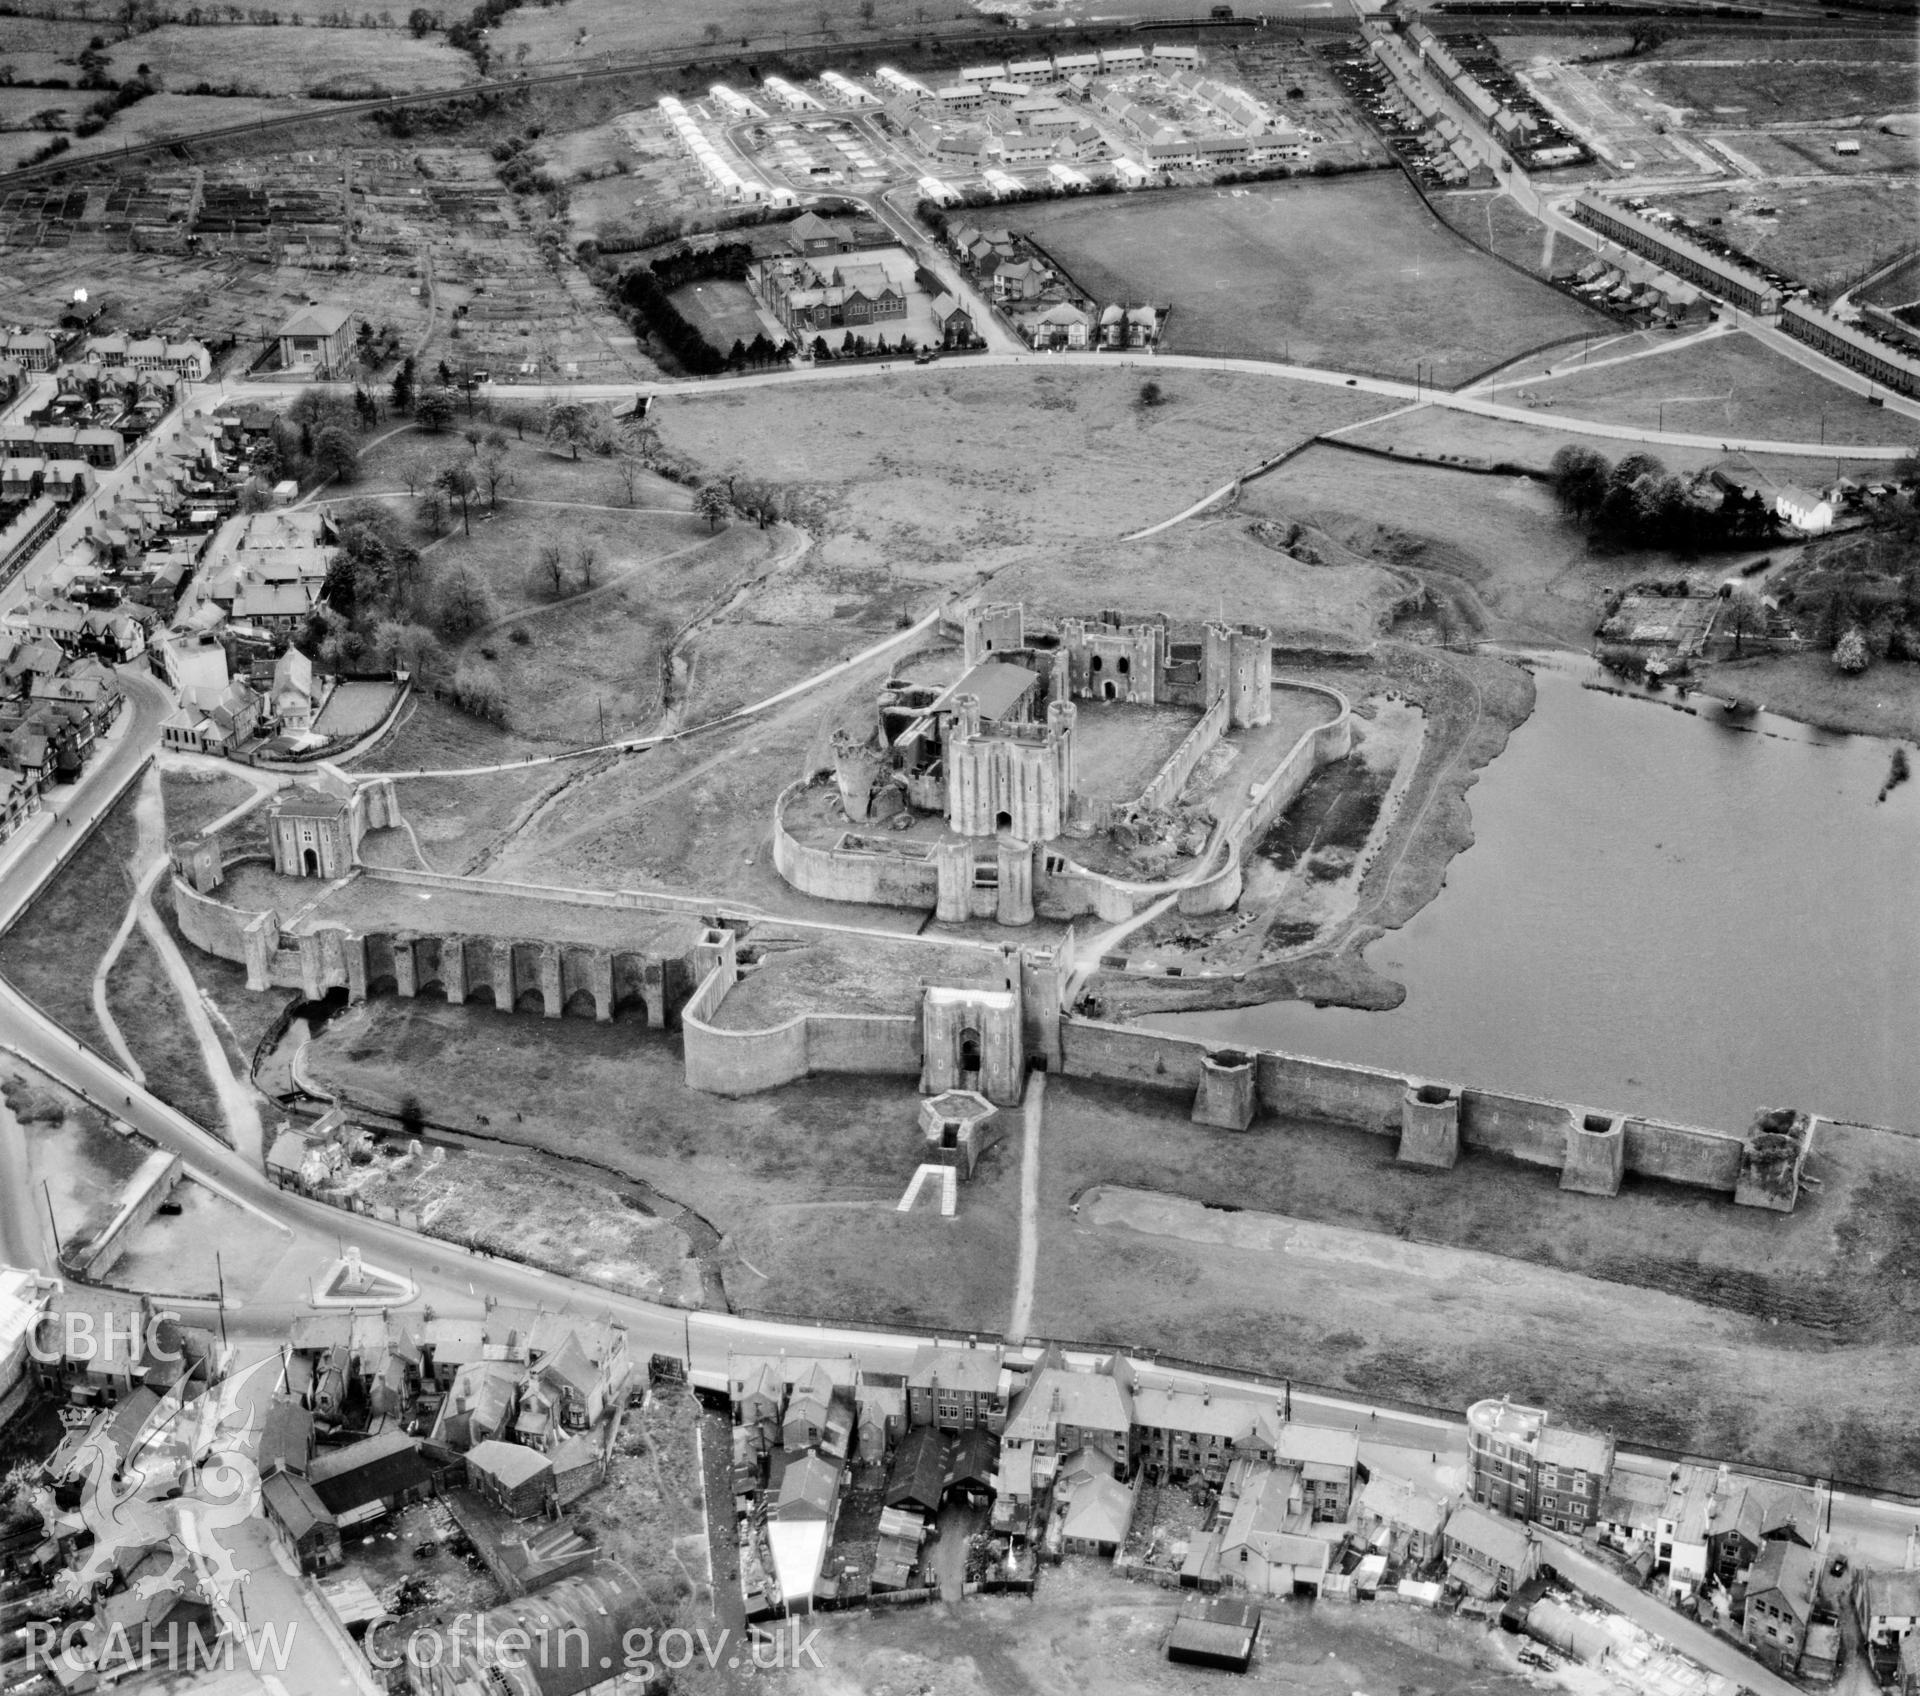 View of Caerphilly showing castle and new housing under construction